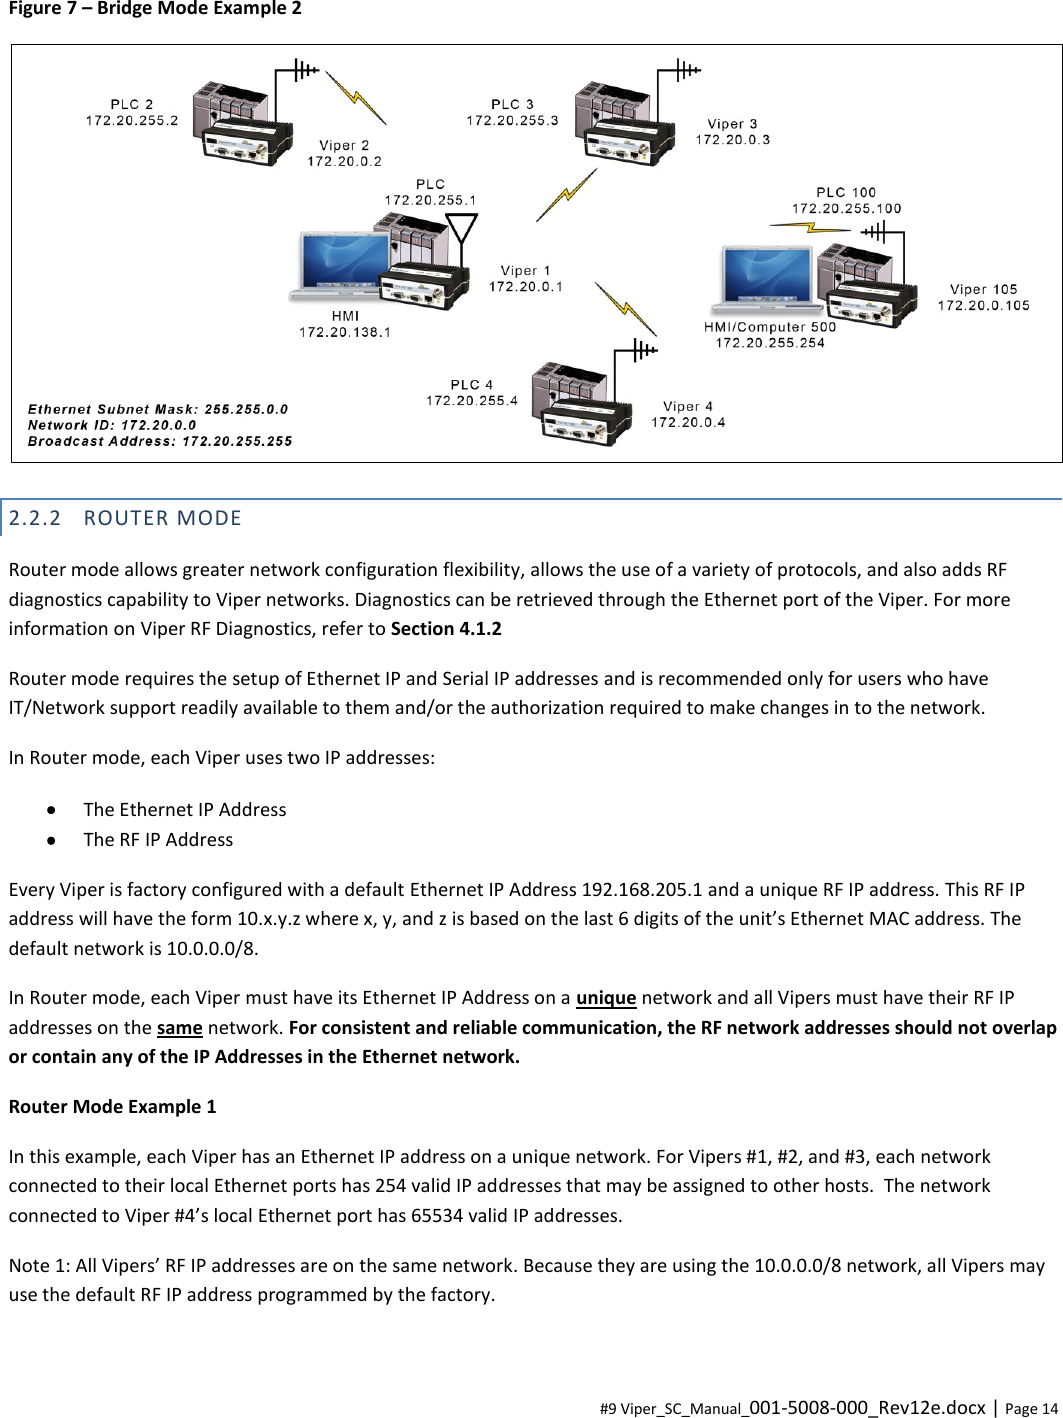  #9 Viper_SC_Manual_001-5008-000_Rev12e.docx | Page 14 Figure 7 – Bridge Mode Example 2  2.2.2 ROUTER MODE Router mode allows greater network configuration flexibility, allows the use of a variety of protocols, and also adds RF diagnostics capability to Viper networks. Diagnostics can be retrieved through the Ethernet port of the Viper. For more information on Viper RF Diagnostics, refer to Section 4.1.2 Router mode requires the setup of Ethernet IP and Serial IP addresses and is recommended only for users who have IT/Network support readily available to them and/or the authorization required to make changes in to the network. In Router mode, each Viper uses two IP addresses:   The Ethernet IP Address   The RF IP Address Every Viper is factory configured with a default Ethernet IP Address 192.168.205.1 and a unique RF IP address. This RF IP address will have the form 10.x.y.z where x, y, and z is based on the last 6 digits of the unit’s Ethernet MAC address. The default network is 10.0.0.0/8.   In Router mode, each Viper must have its Ethernet IP Address on a unique network and all Vipers must have their RF IP addresses on the same network. For consistent and reliable communication, the RF network addresses should not overlap or contain any of the IP Addresses in the Ethernet network. Router Mode Example 1 In this example, each Viper has an Ethernet IP address on a unique network. For Vipers #1, #2, and #3, each network connected to their local Ethernet ports has 254 valid IP addresses that may be assigned to other hosts.  The network connected to Viper #4’s local Ethernet port has 65534 valid IP addresses. Note 1: All Vipers’ RF IP addresses are on the same network. Because they are using the 10.0.0.0/8 network, all Vipers may use the default RF IP address programmed by the factory. 